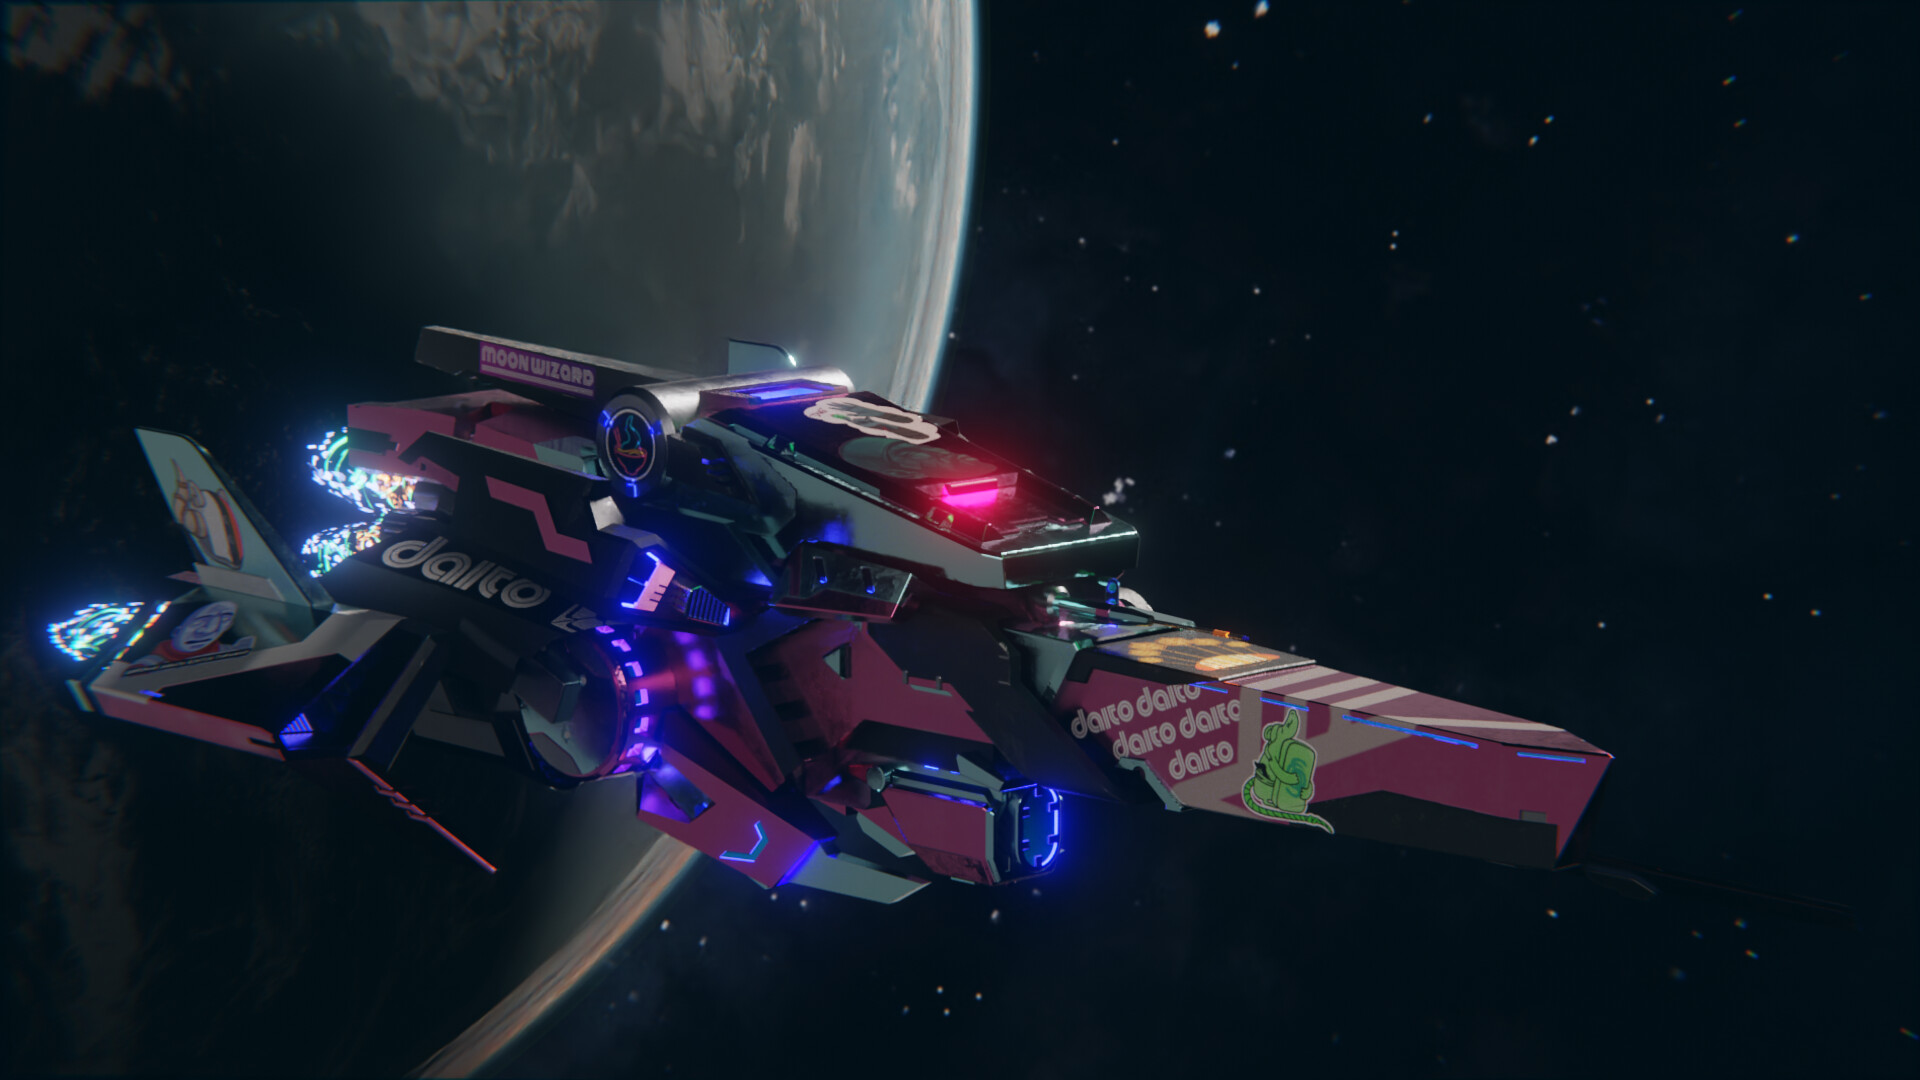 Fanmade Spaceship inspired in game manufactory 